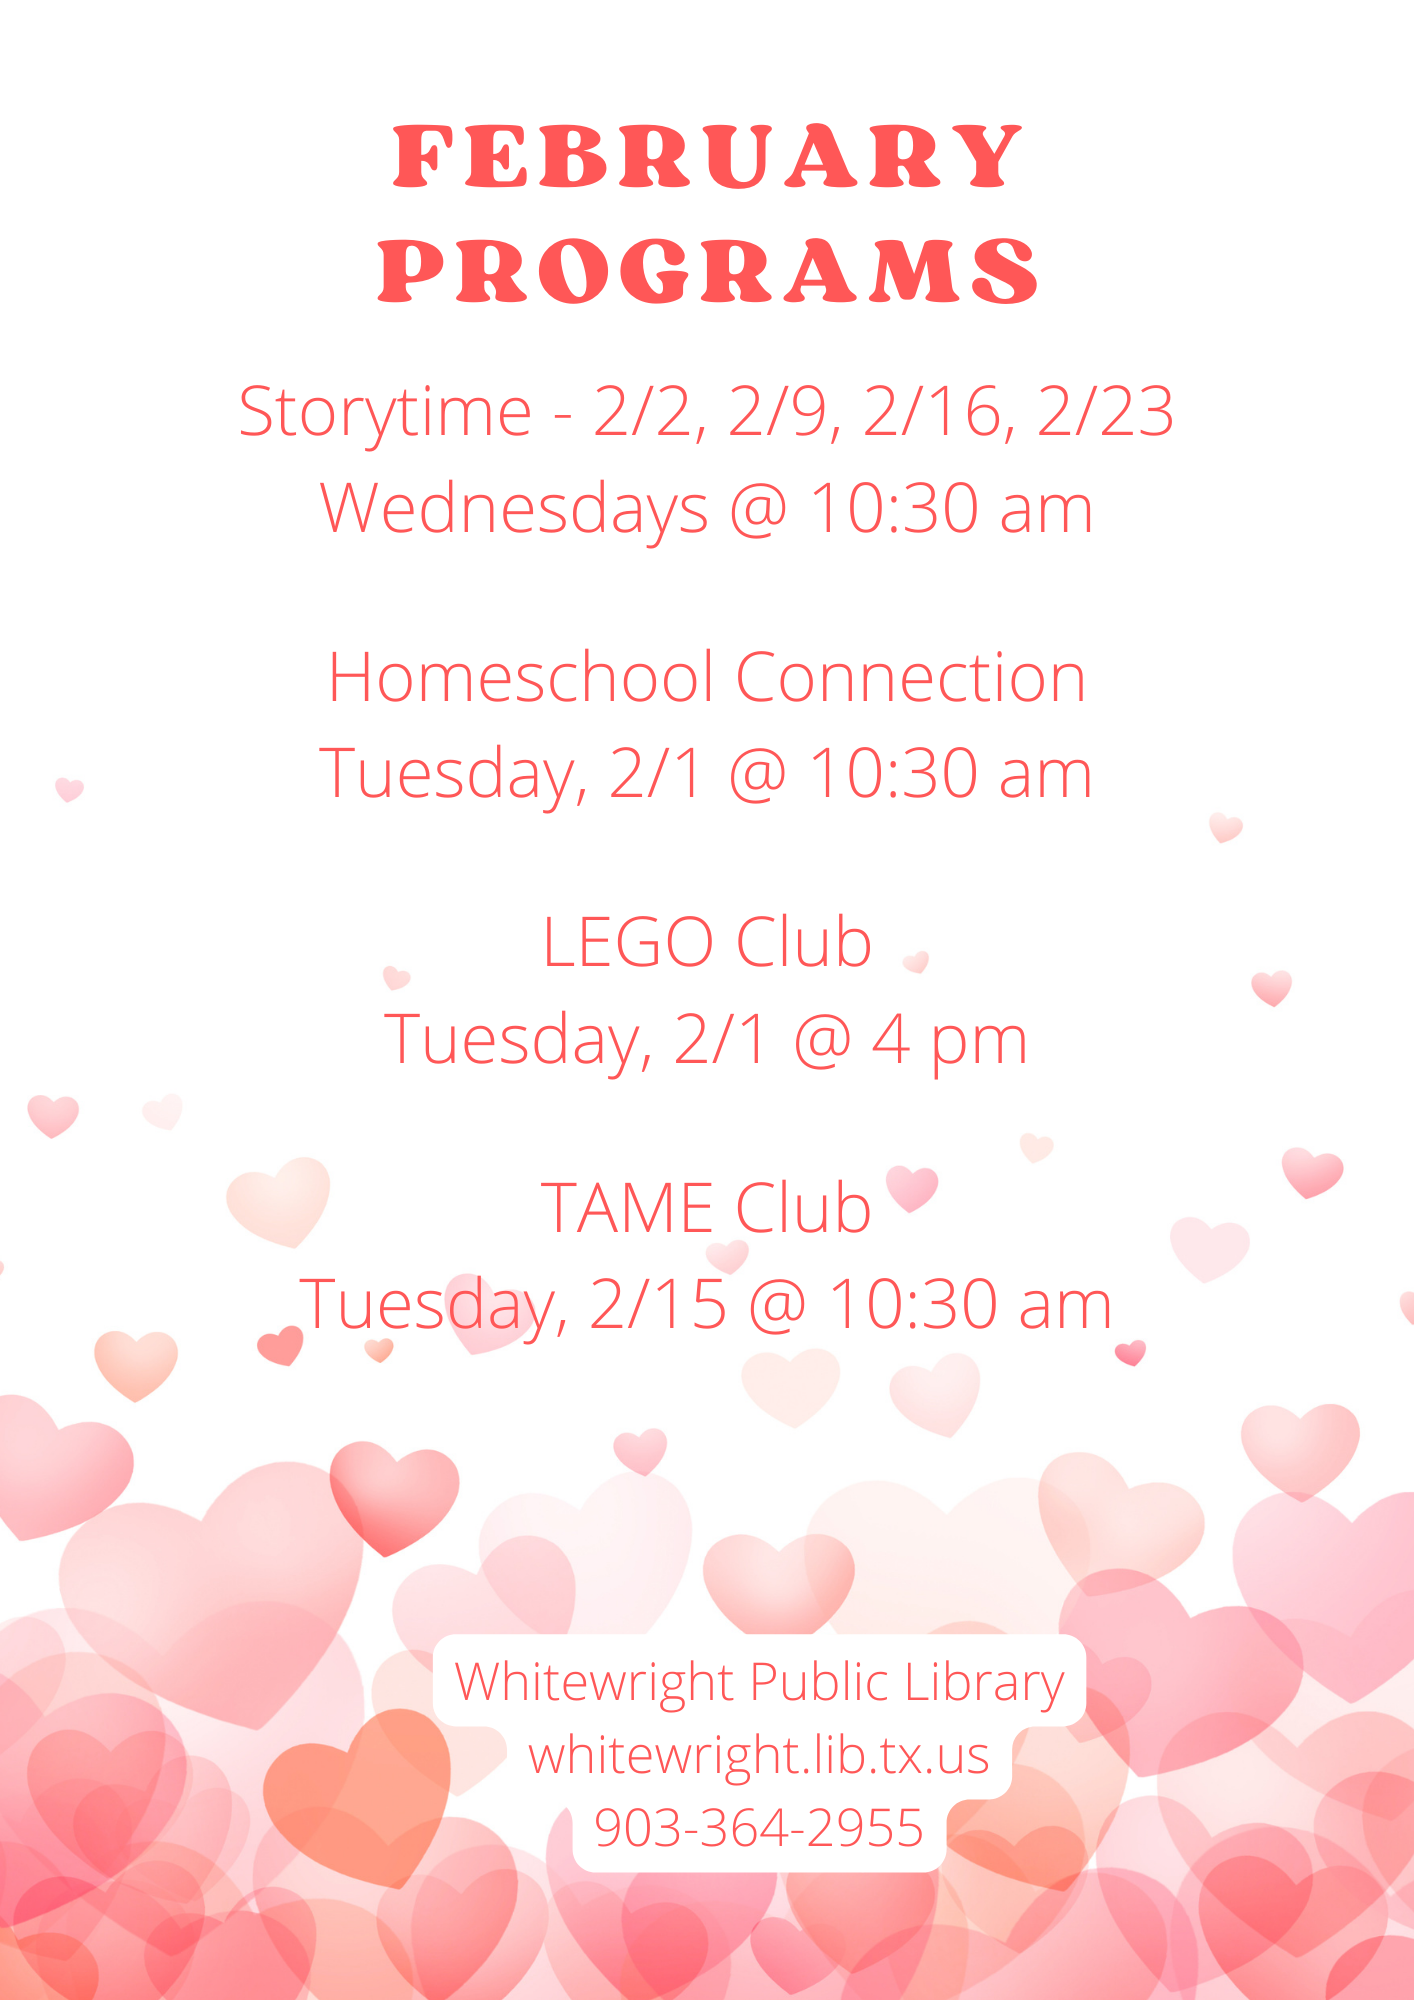 February Programs.png